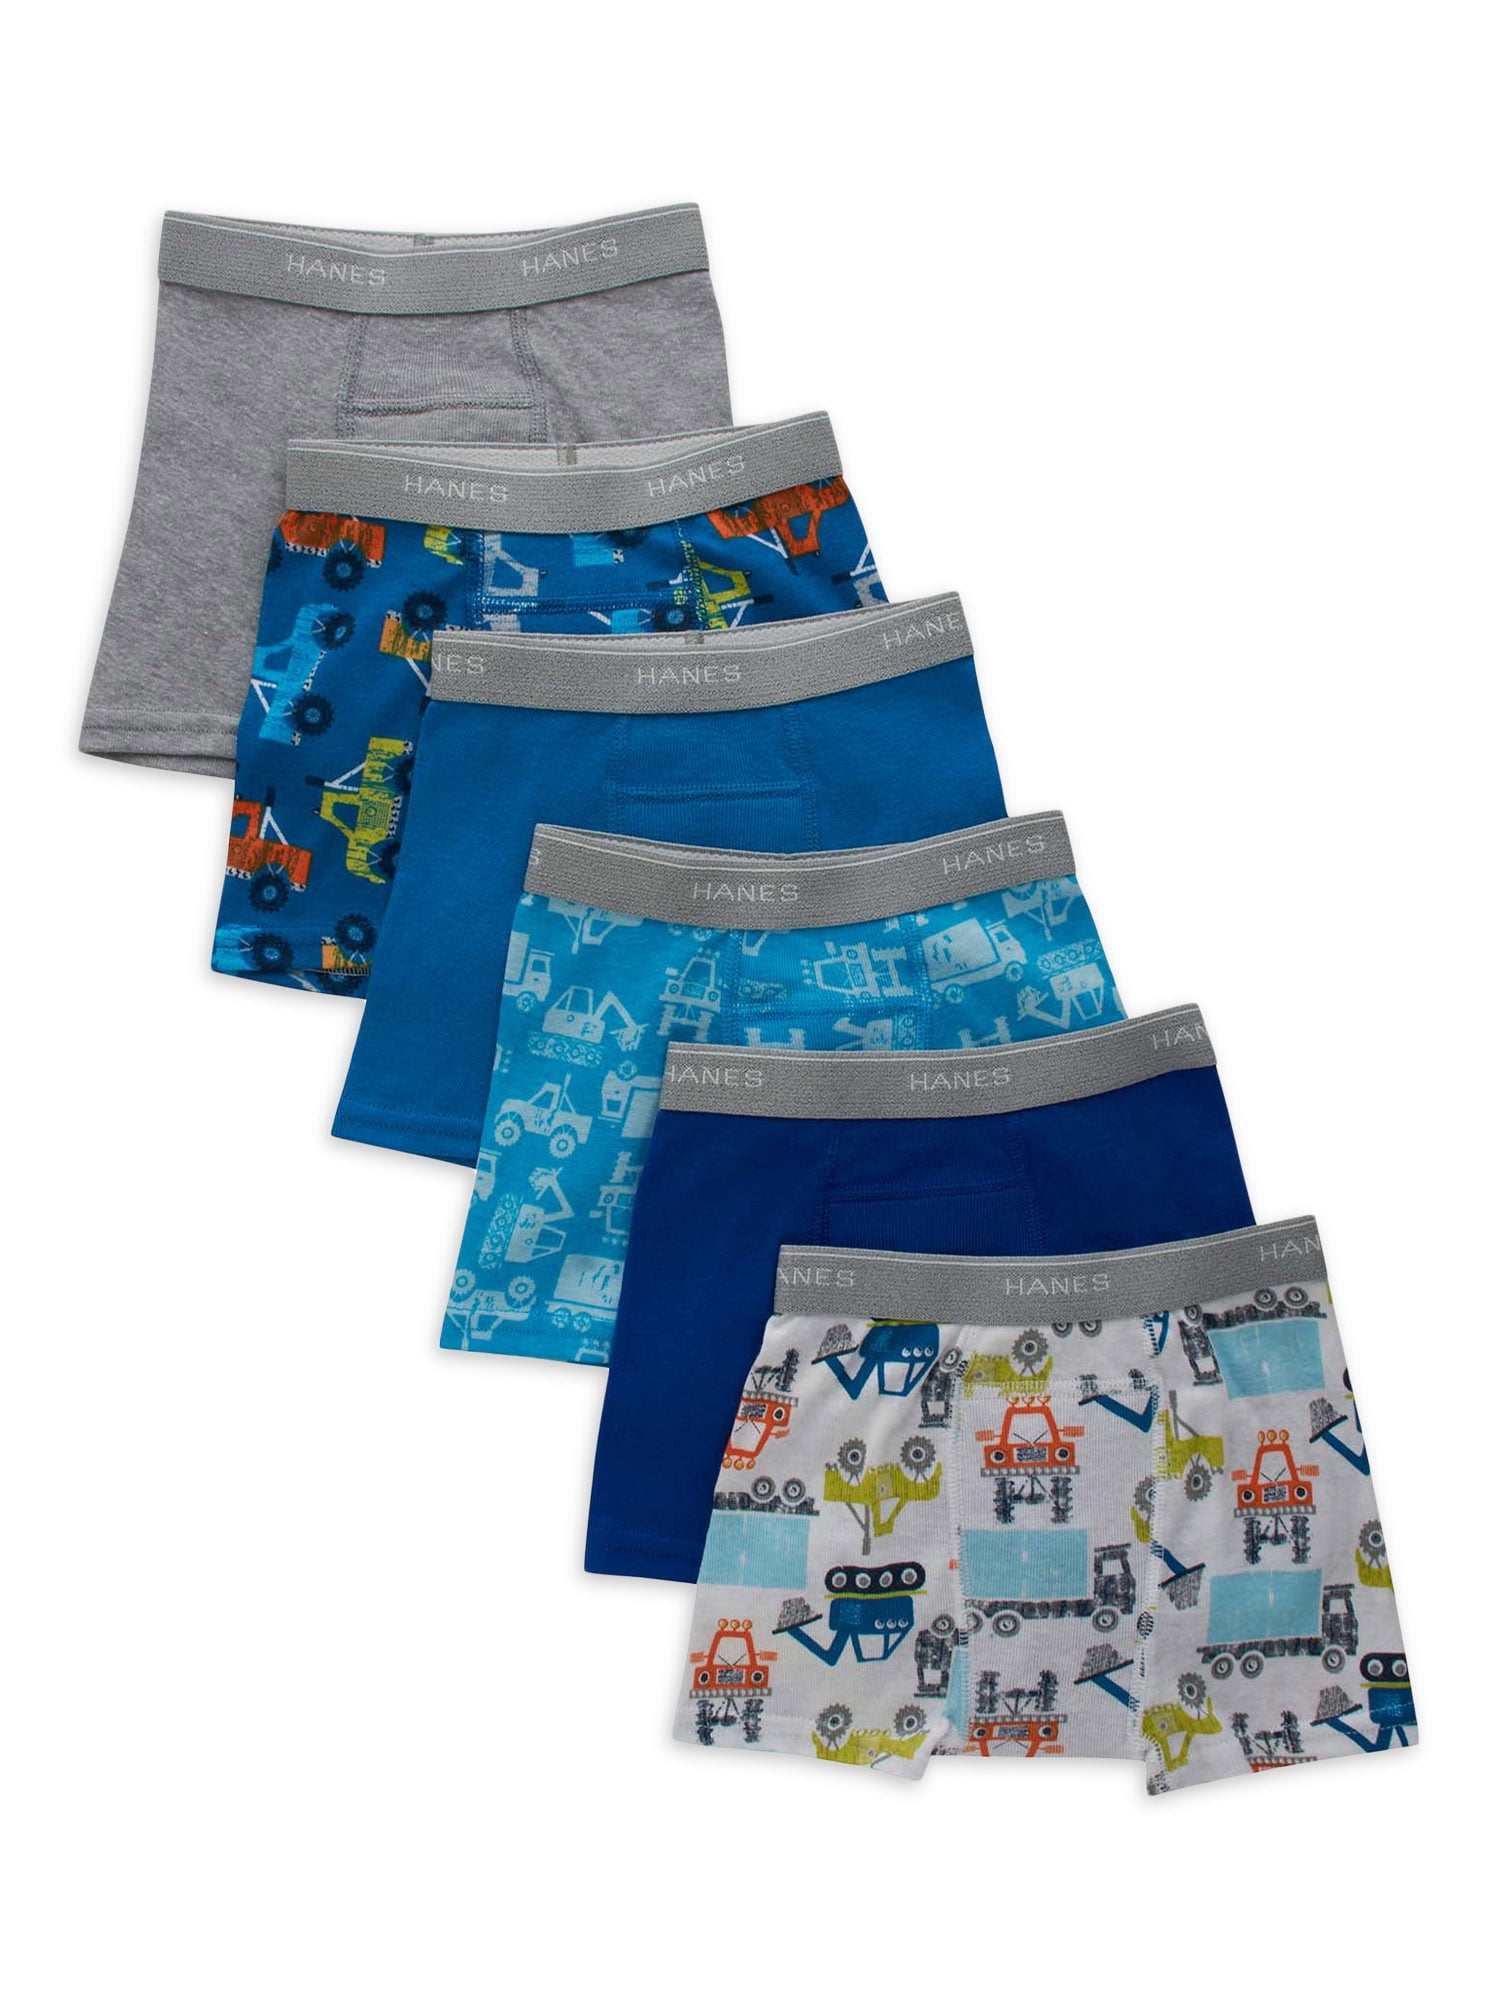 Boys Boxer Briefs Toddler Training Underwear Easy Pull Up Handles 4 Pack 